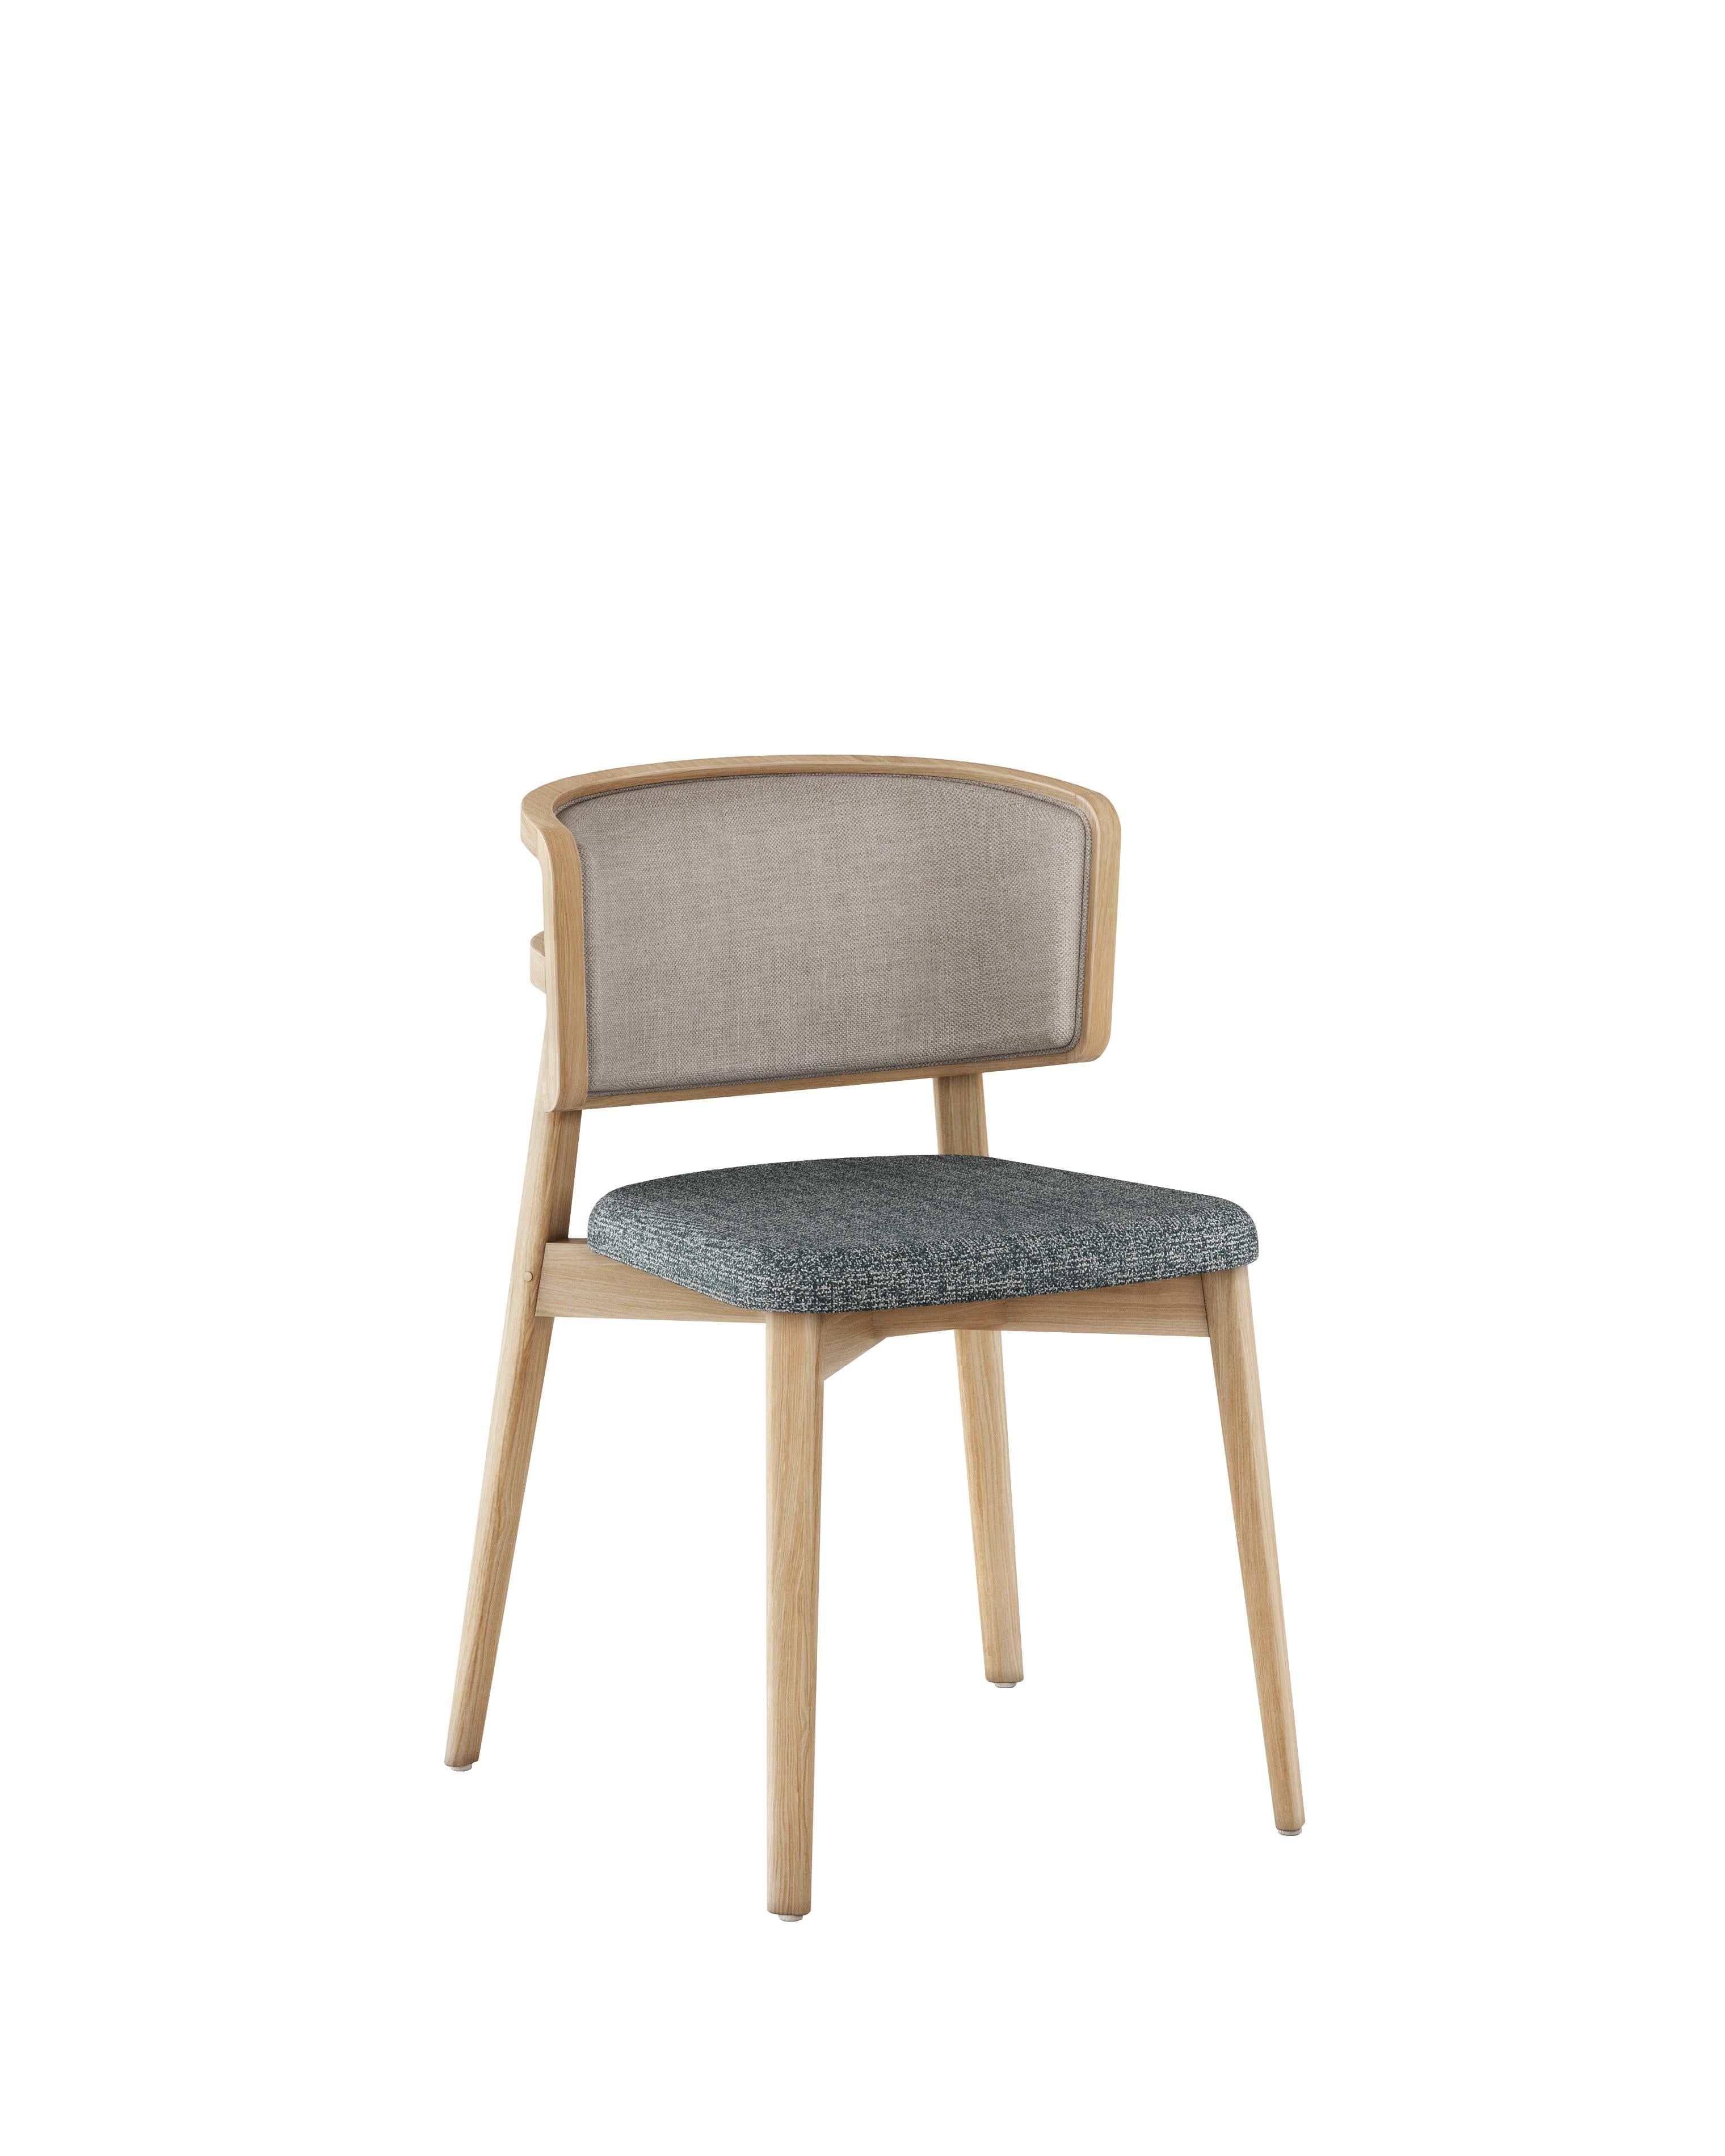 Alice is a wooden chair, where the possibilities are endless. Available in a wide range of woods and fabrics, this dining chair is versatile enough to enhance any dining room decor.